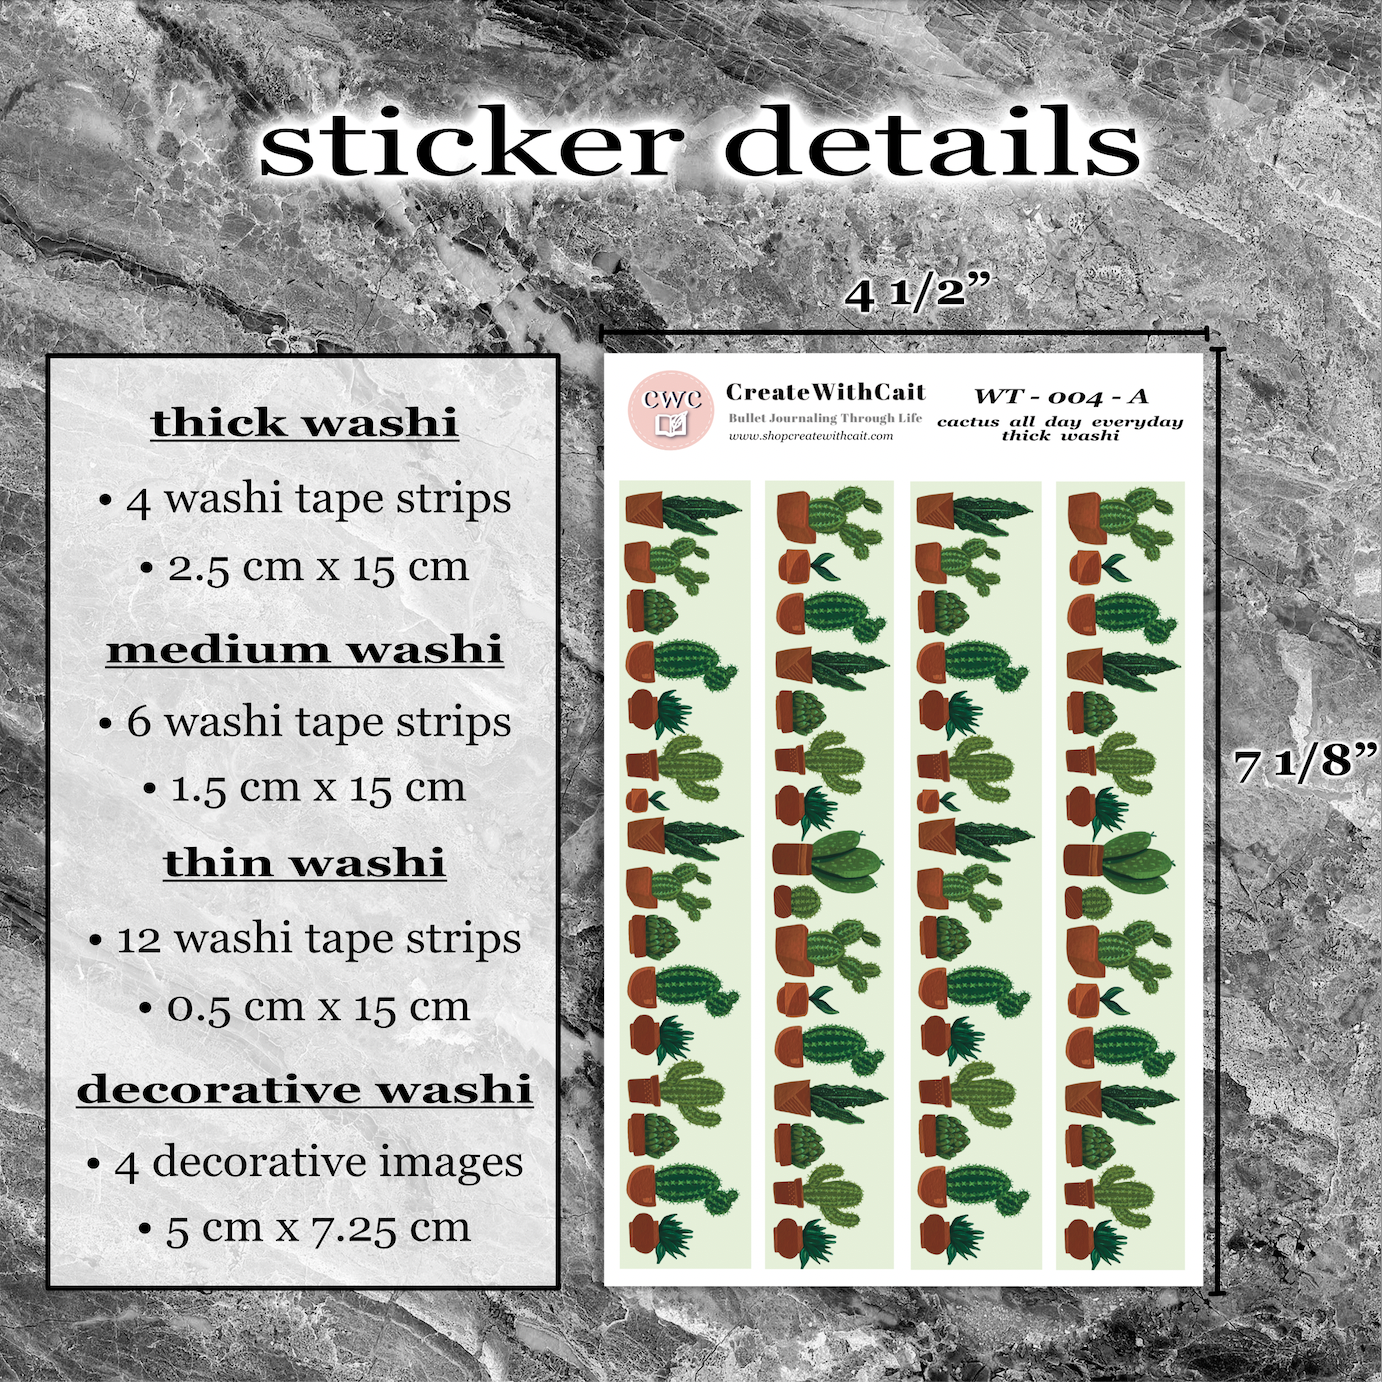 Cactus All Day Everyday Washi Tape